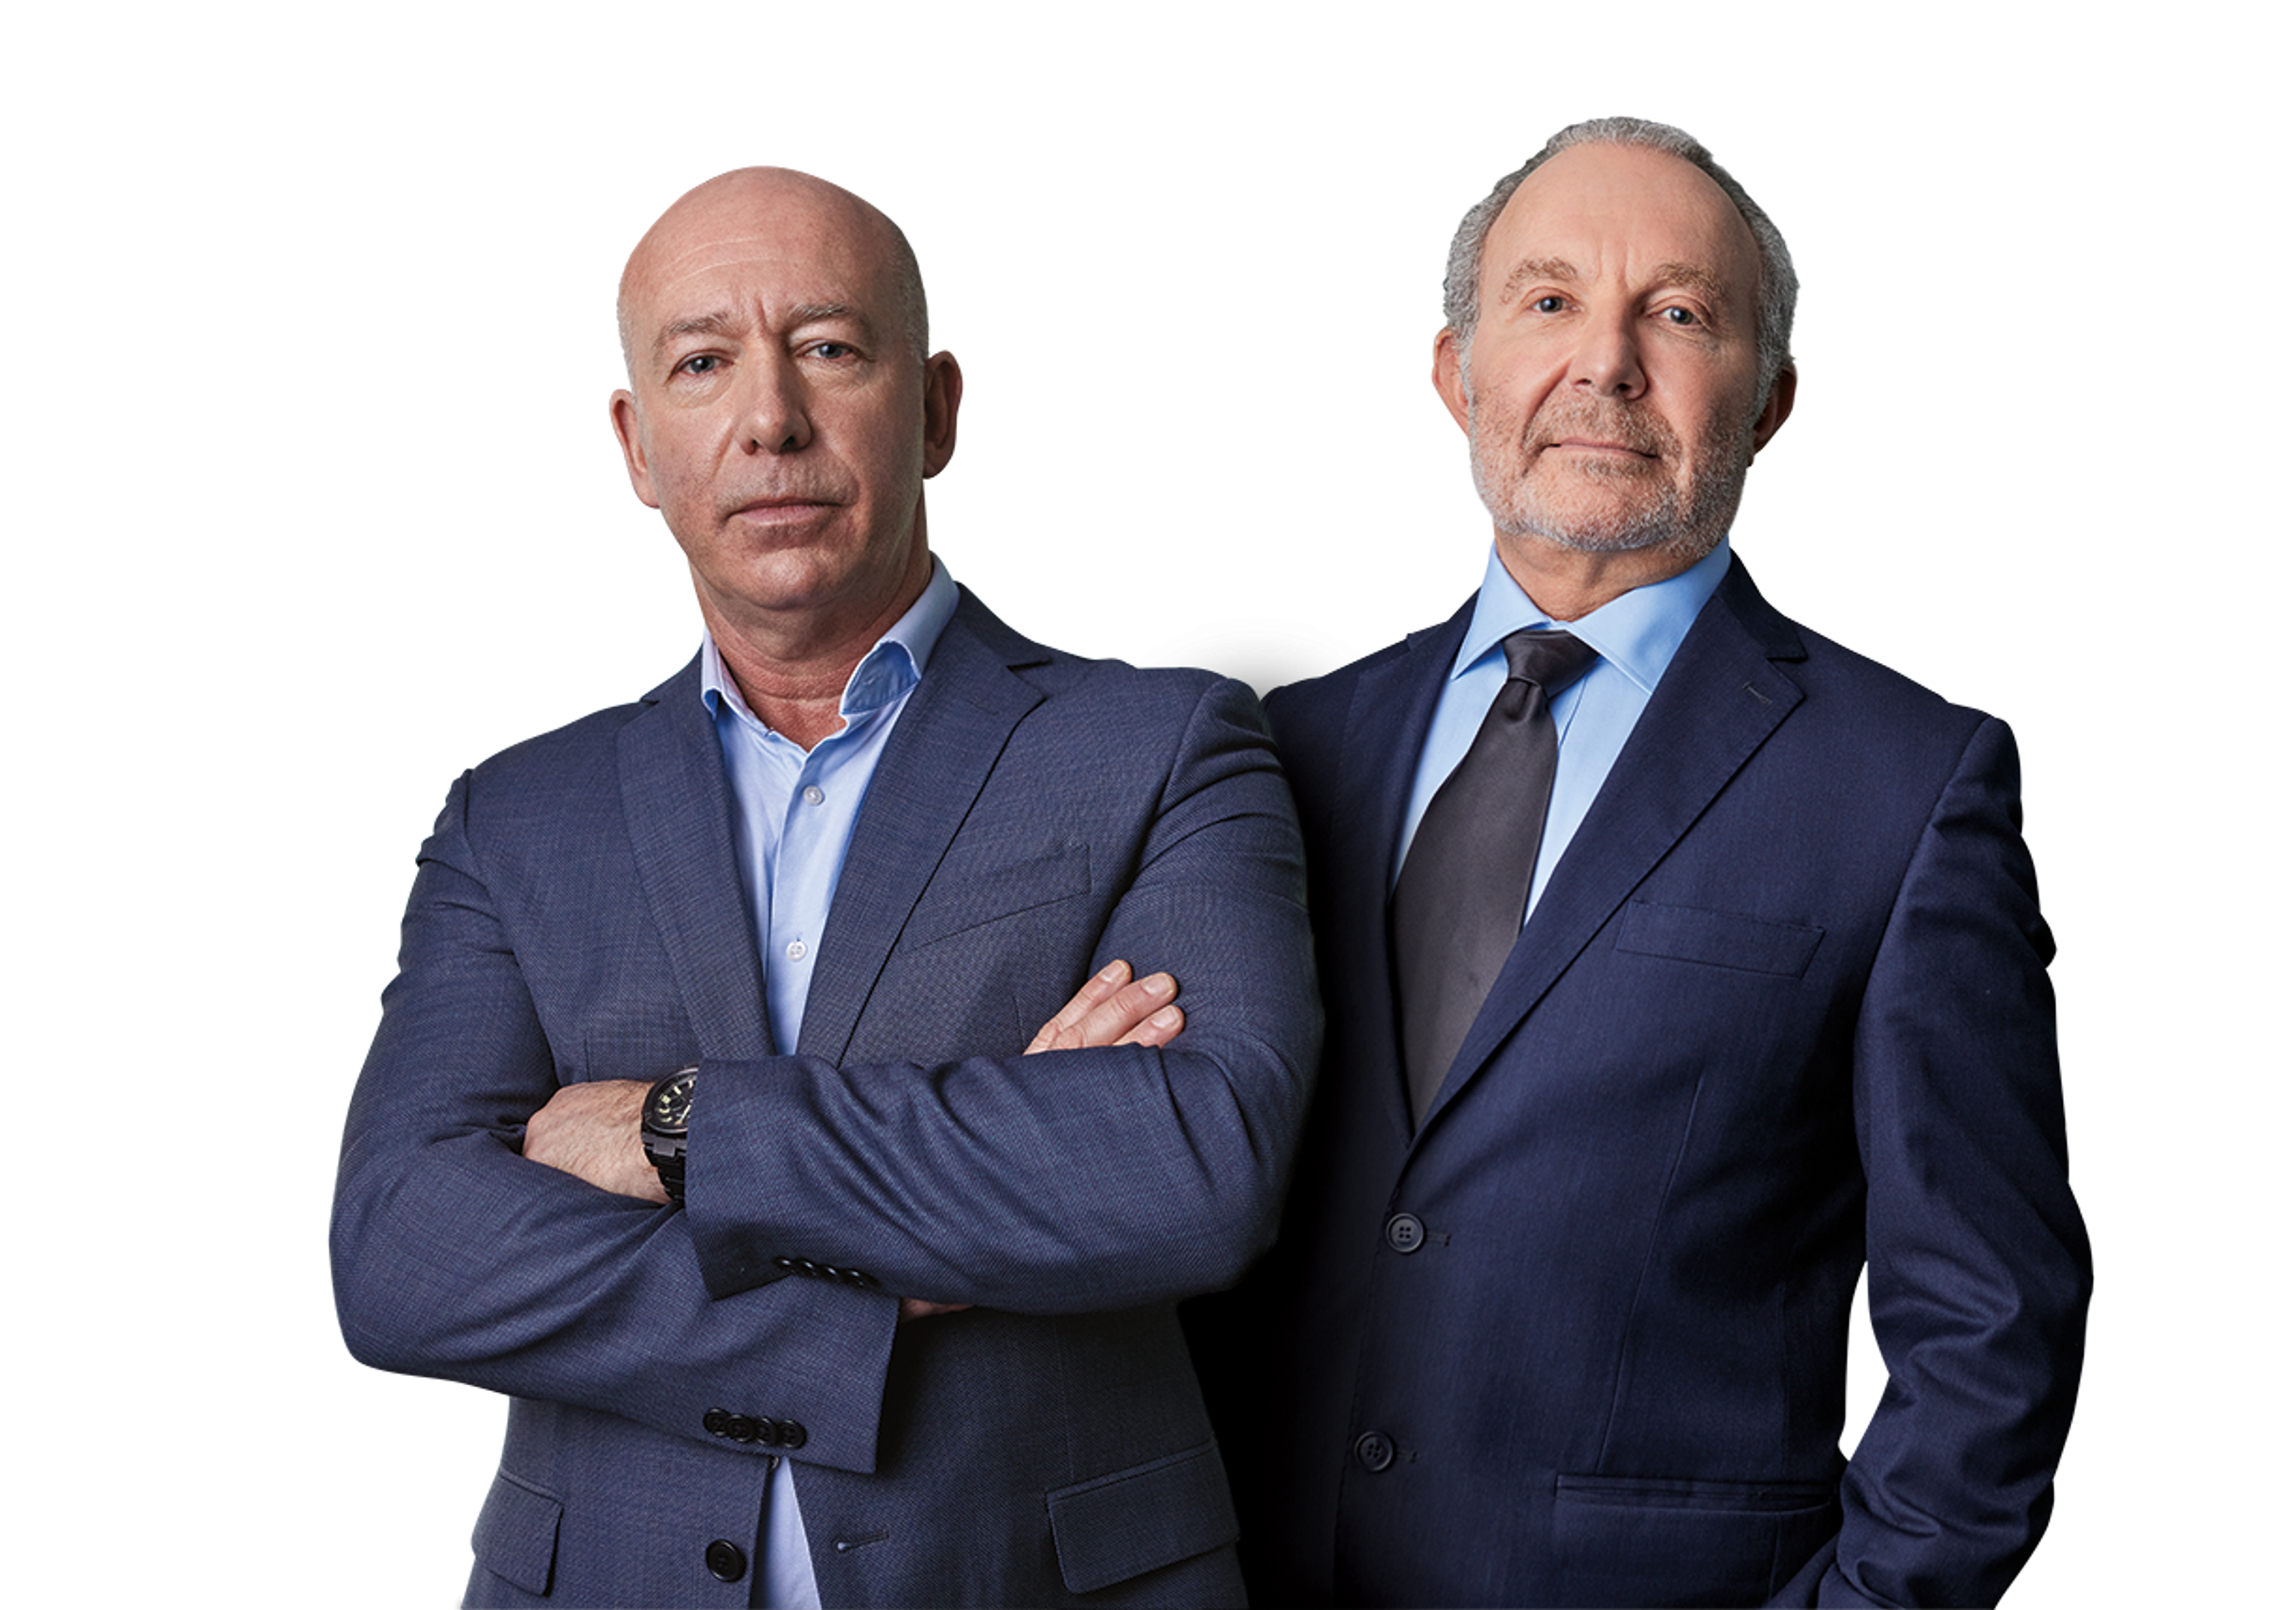 Our founders: Dr. Simon Pimstone & Dr. Victor Hasson